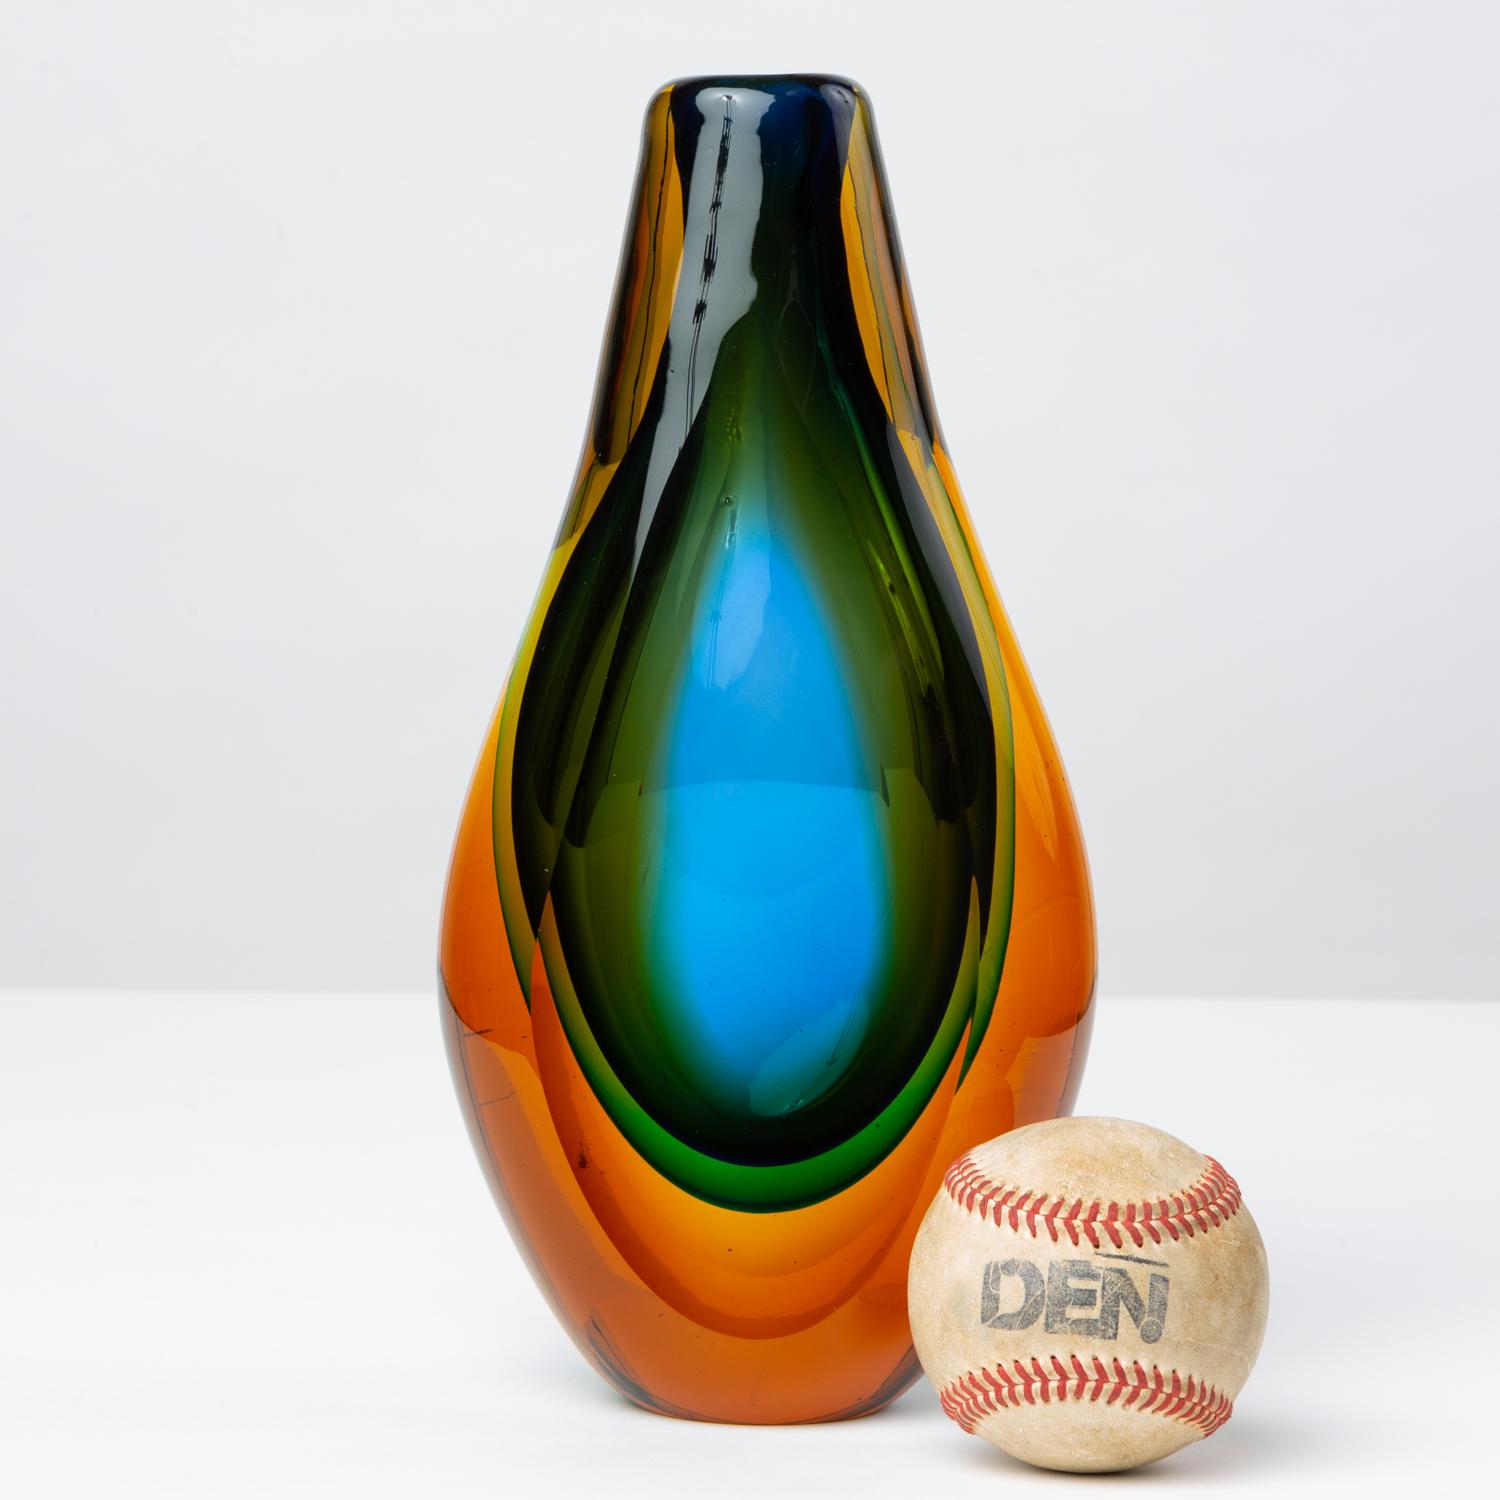 A colorful Murano art glass vase with a tulip shape and narrow profile. The triple Sommerso technique suspends a teardrop formation of blue inside a layer of green, both encased in the amber-colored glass outside. The two ground edges refract the